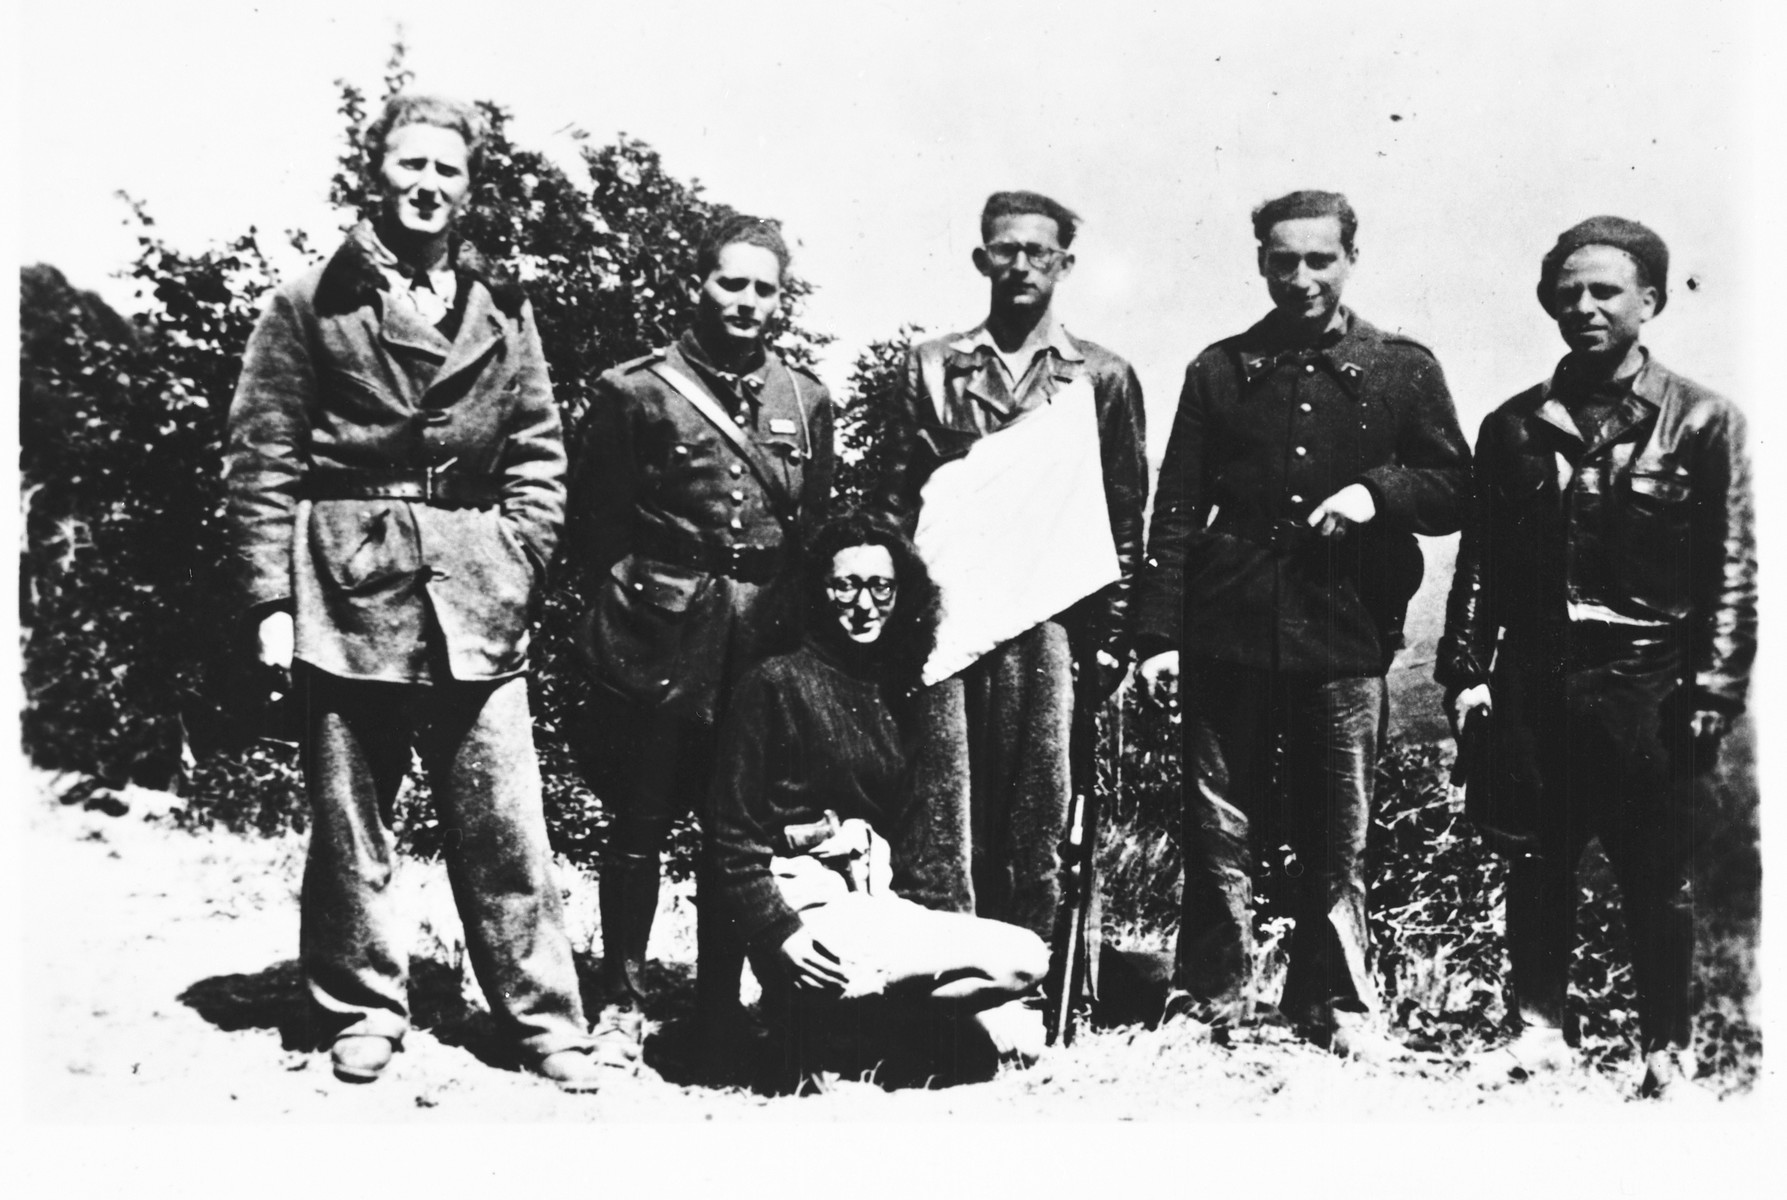 Group portrait of members of the French Jewish resistance group Armée Juive dressed in military uniform.

During the last year of the war, the Armée Juive joined forces with the Maquis resistance.  Among those pictured are Patricia Graff-Rubel (kneeling), and standing from left to right: Jean-Jacques Fraicent (Frayman), Jacques Lazarus (Jacquel) who served as the AJ's military instructor, Henri Broder, Pierre Loeb and Albert Cohen (Bebe).